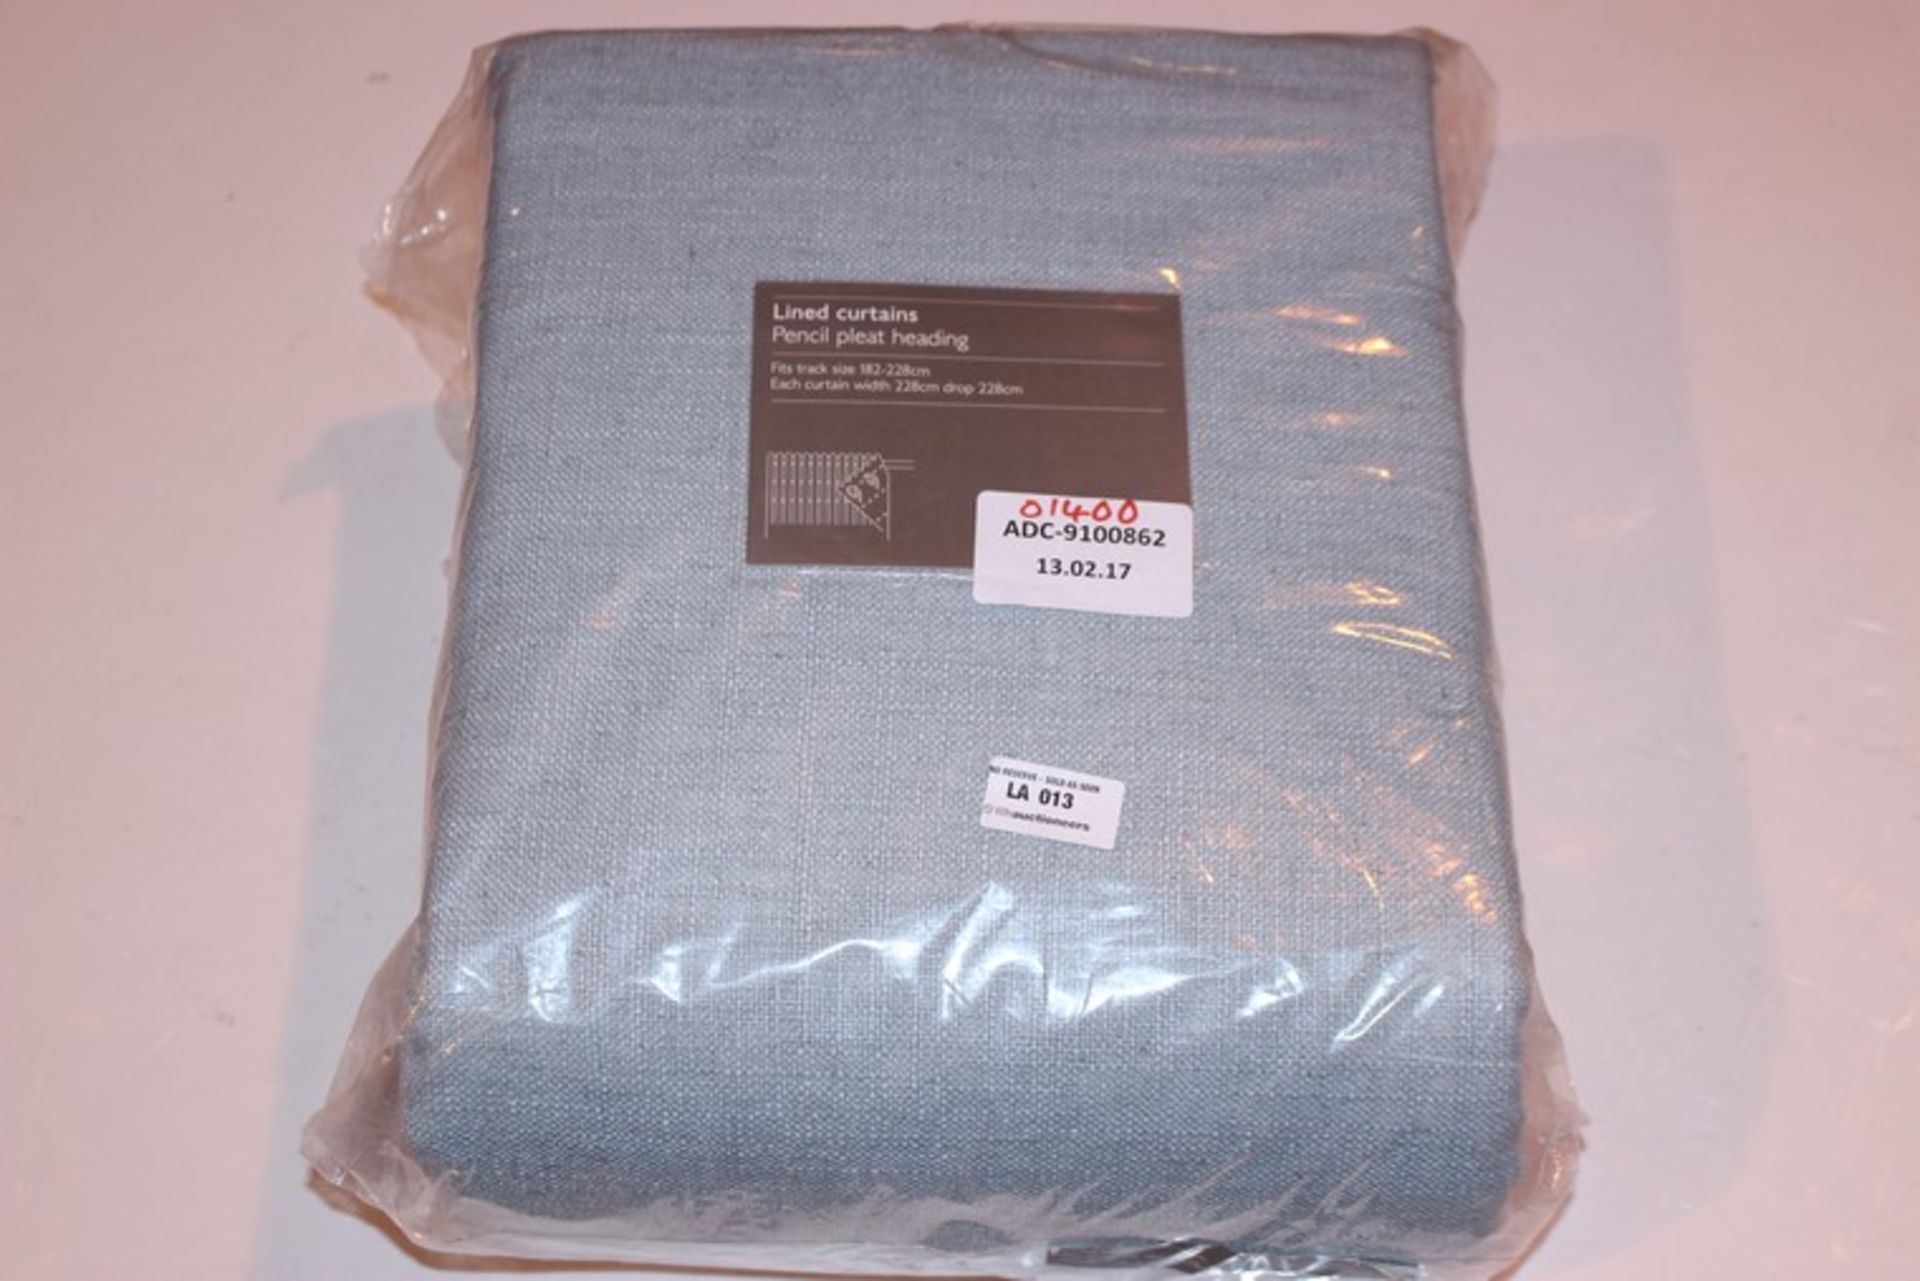 1 x PAIR OF SIZE 182X228CM LINED PENCIL PLEAT CURTAINS IN DUCK EGG BLUE RRP £140 (13.2.17) *PLEASE